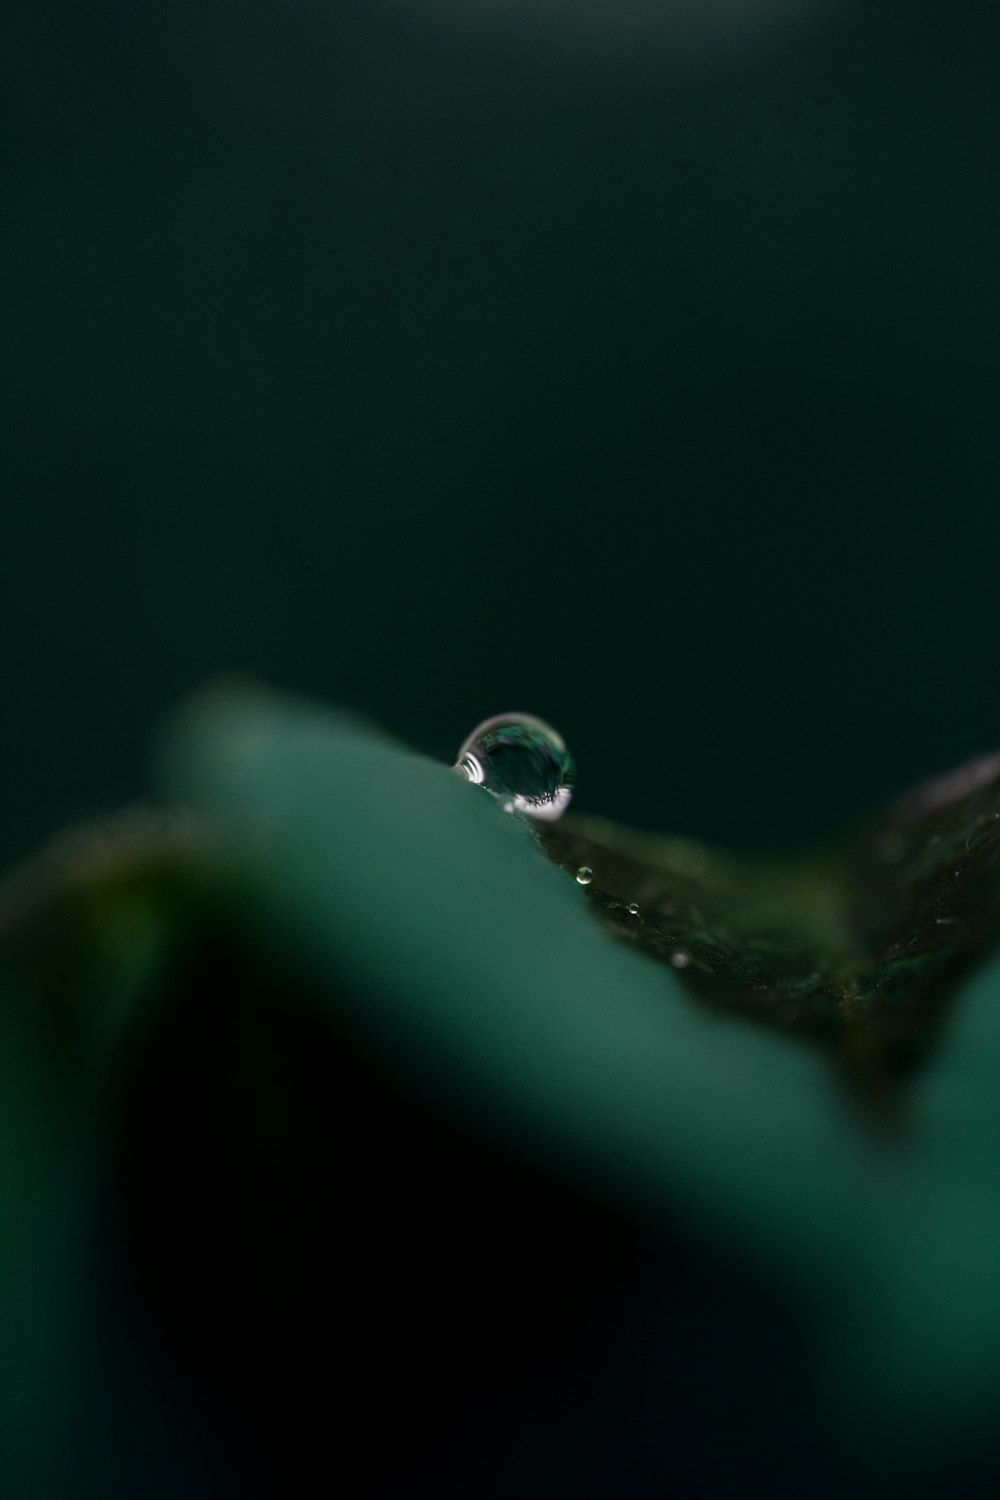 a drop of water sitting on top of a green leaf